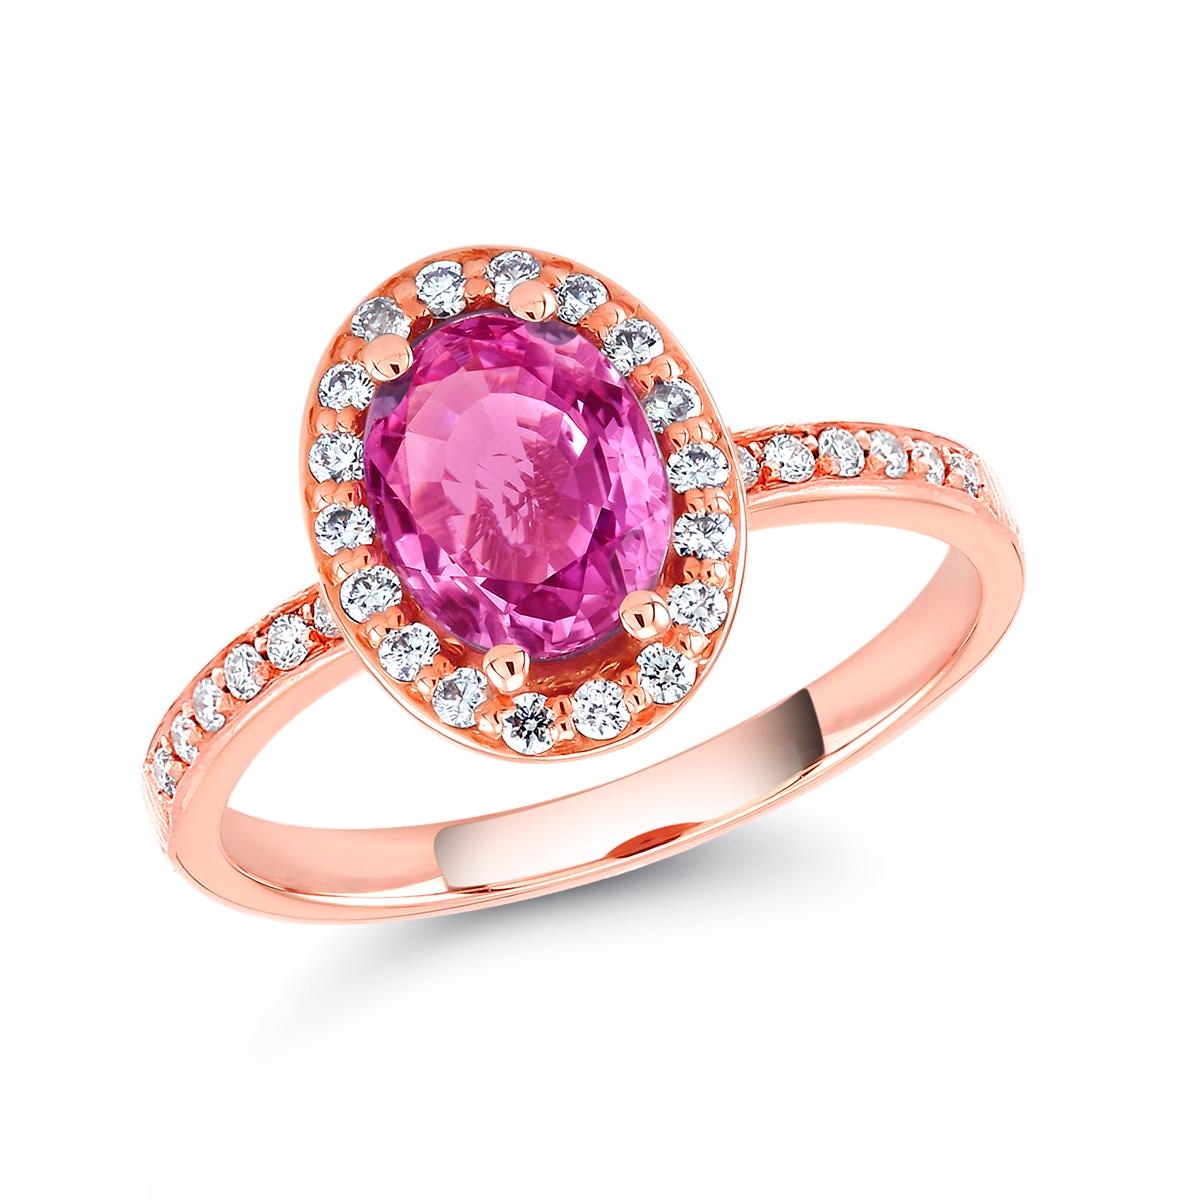 Women's Oval Pink Sapphire and Diamond Rose Gold Cocktail Ring Weighing 1.75 Carat